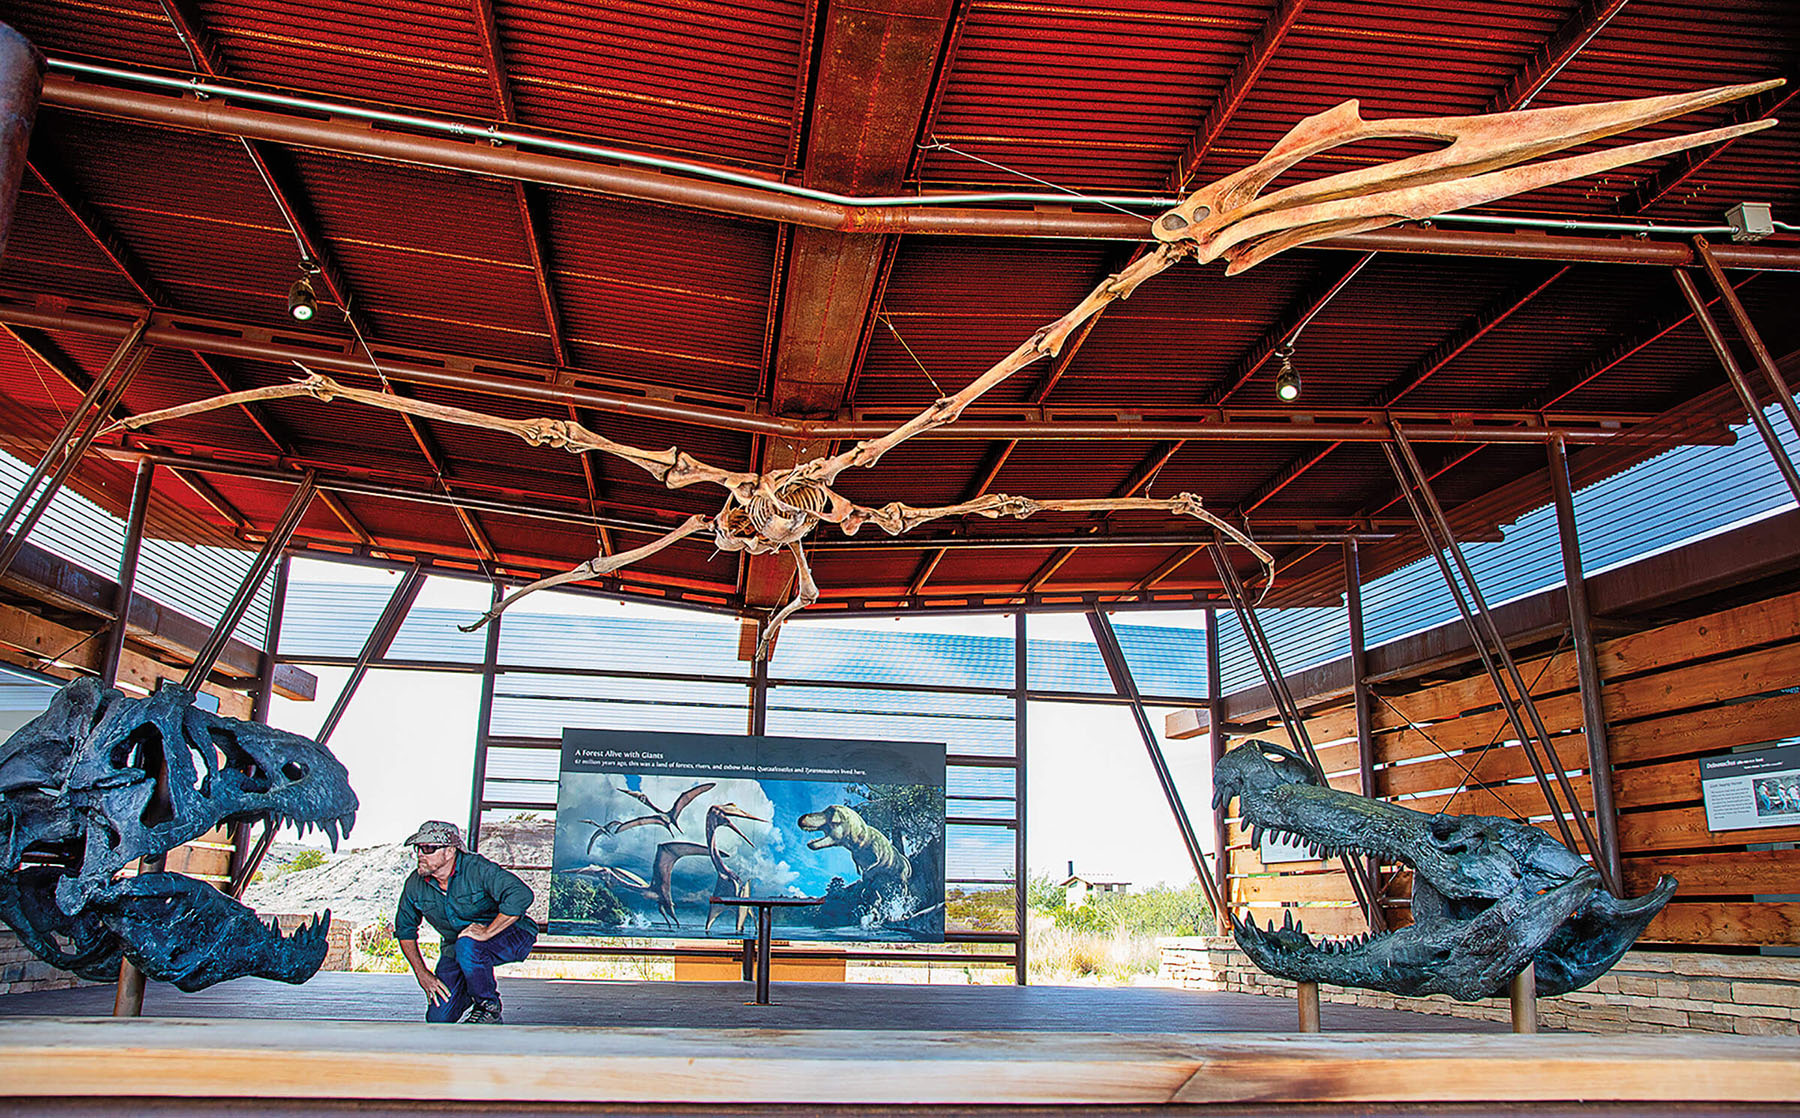 A large winged dinosaur fossil looms on the ceiling of an outdoor exhibit